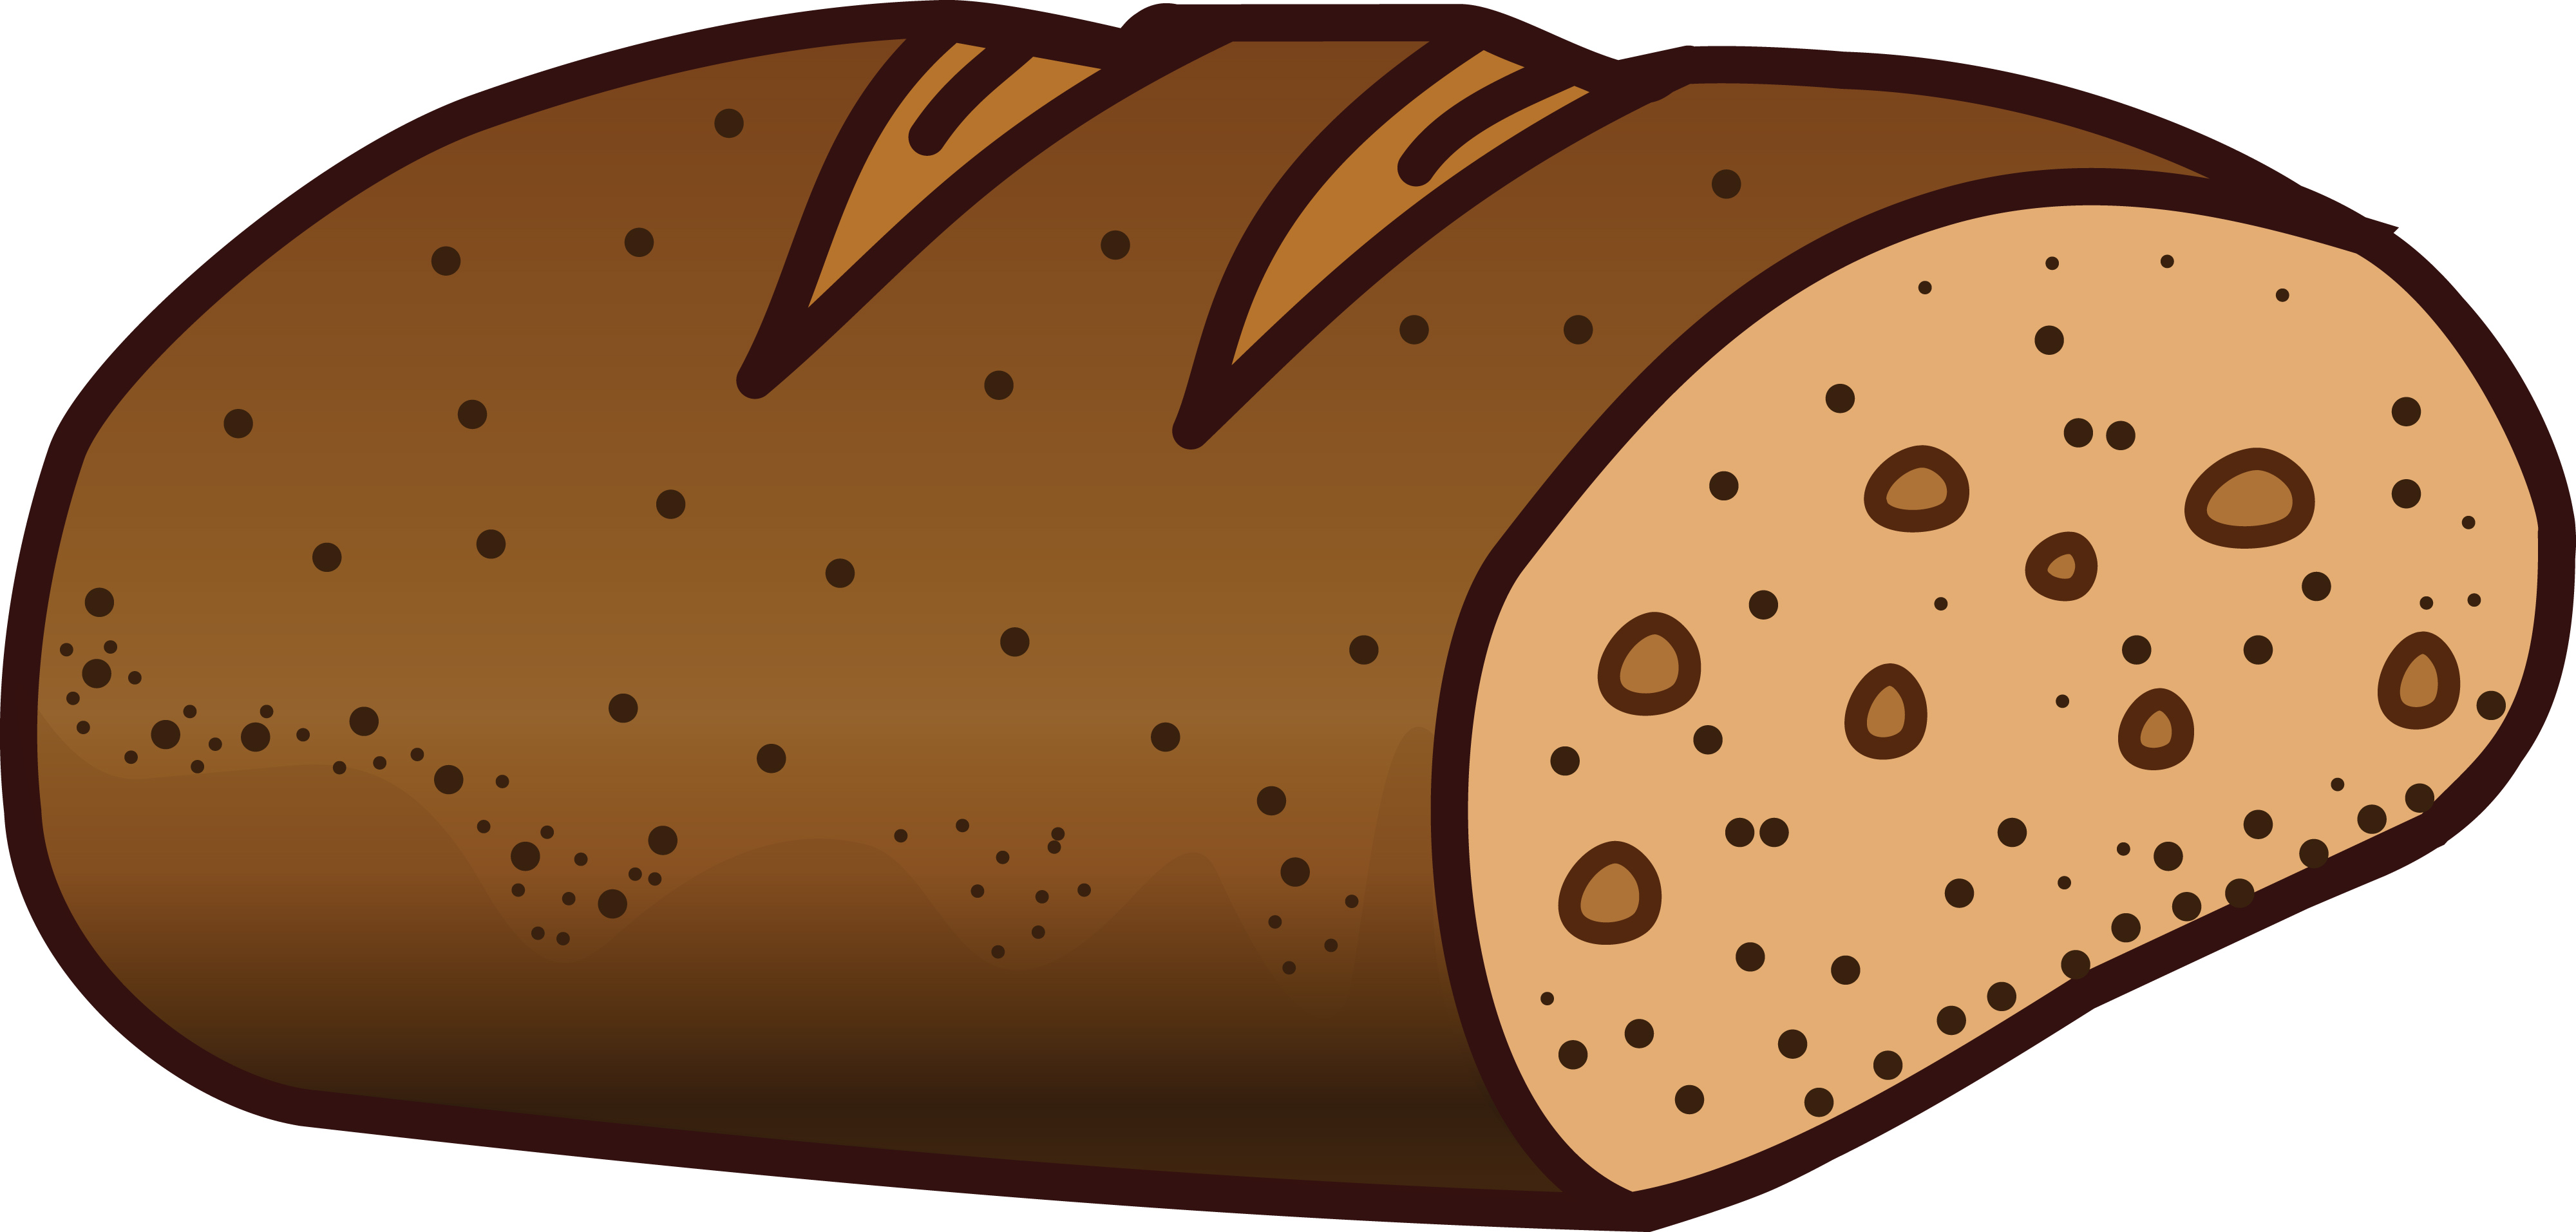 Loaf Of Bread Clipart Free To Use Clip Art Resource Wikiclipart | The ...